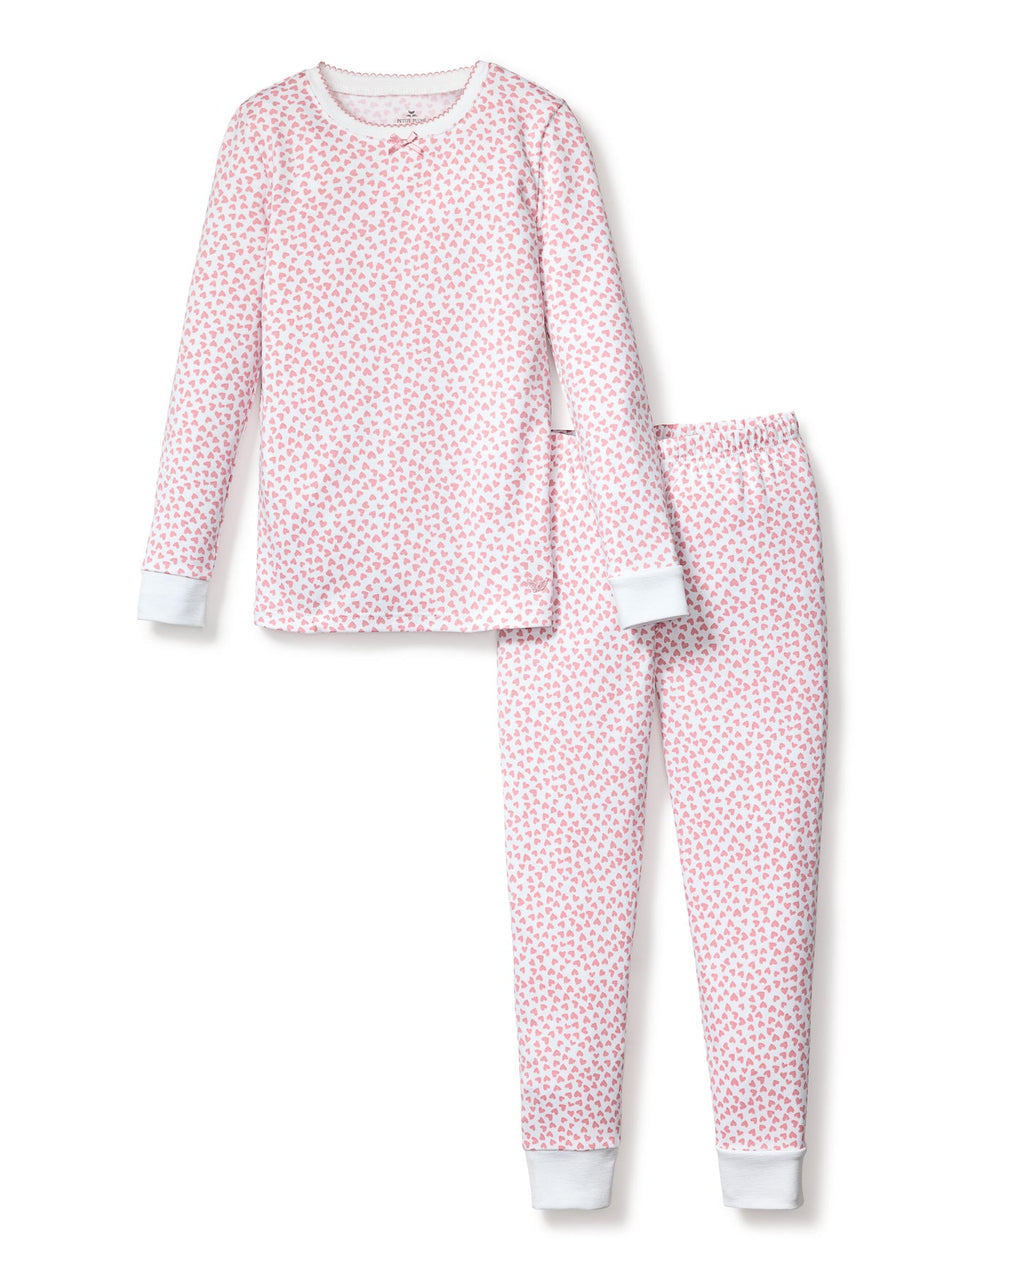 Petite Plume Tight Fit Pajamas in Sweethearts